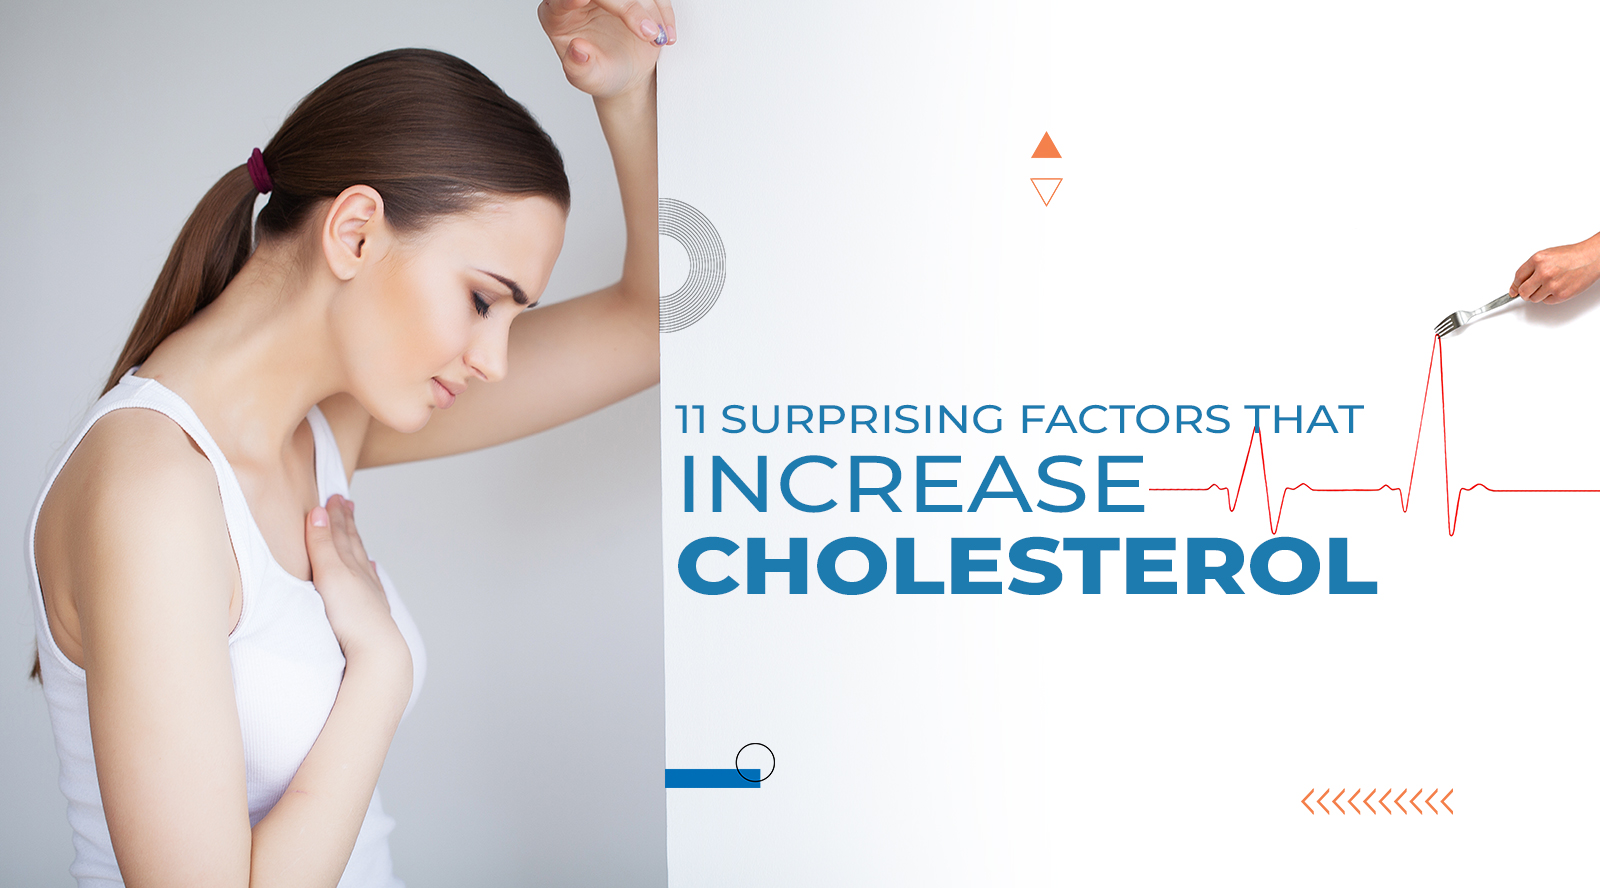 11 Surprising Factors that Can Cause a Sudden Increase in Cholesterol